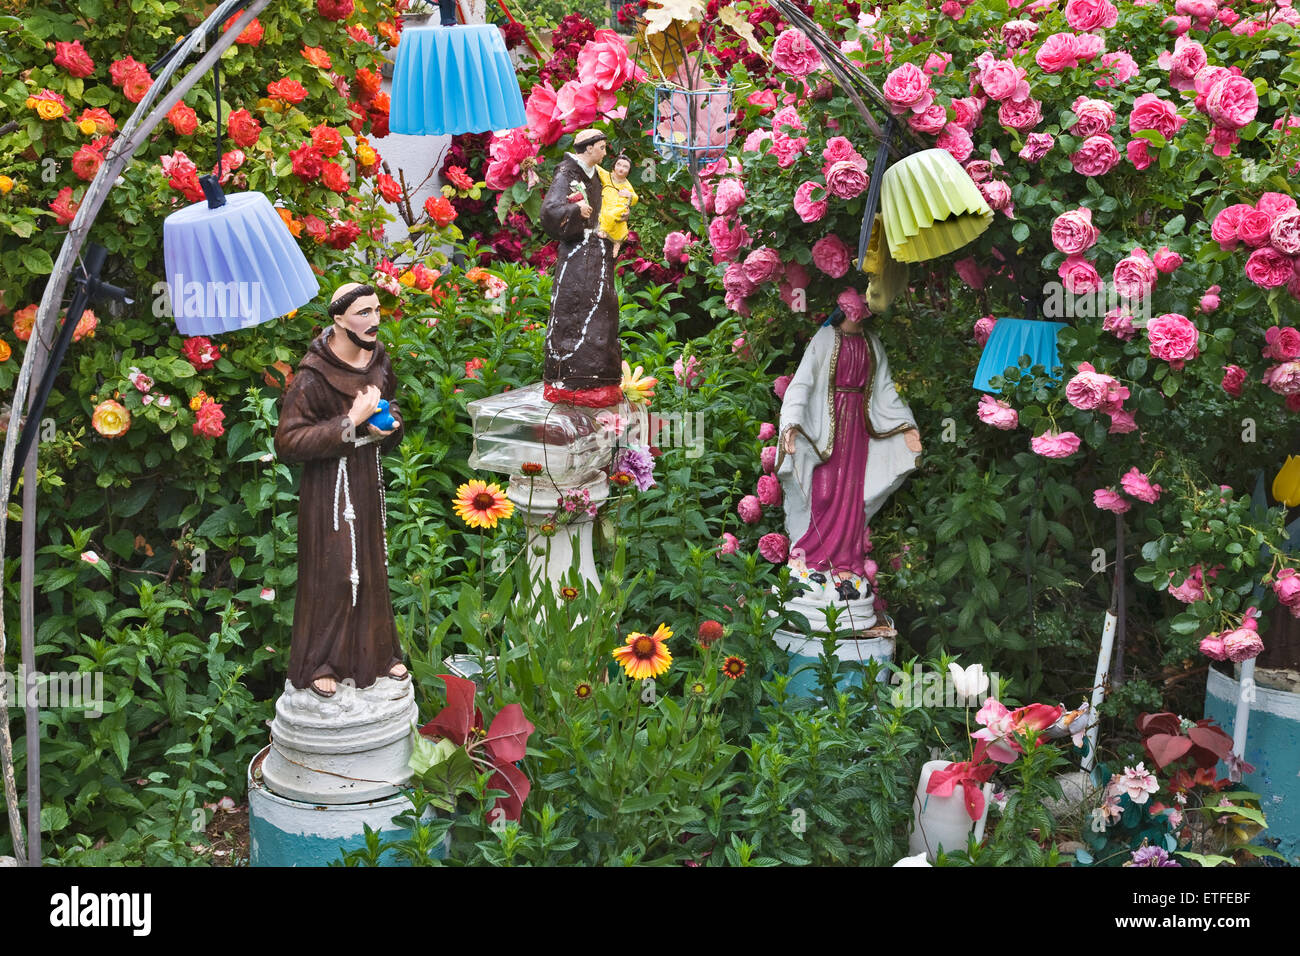 Religious figurines and  June bright June  blooming roses create a quirky but beautiful diorama at the garden of C. L. "Tunnie". Stock Photo